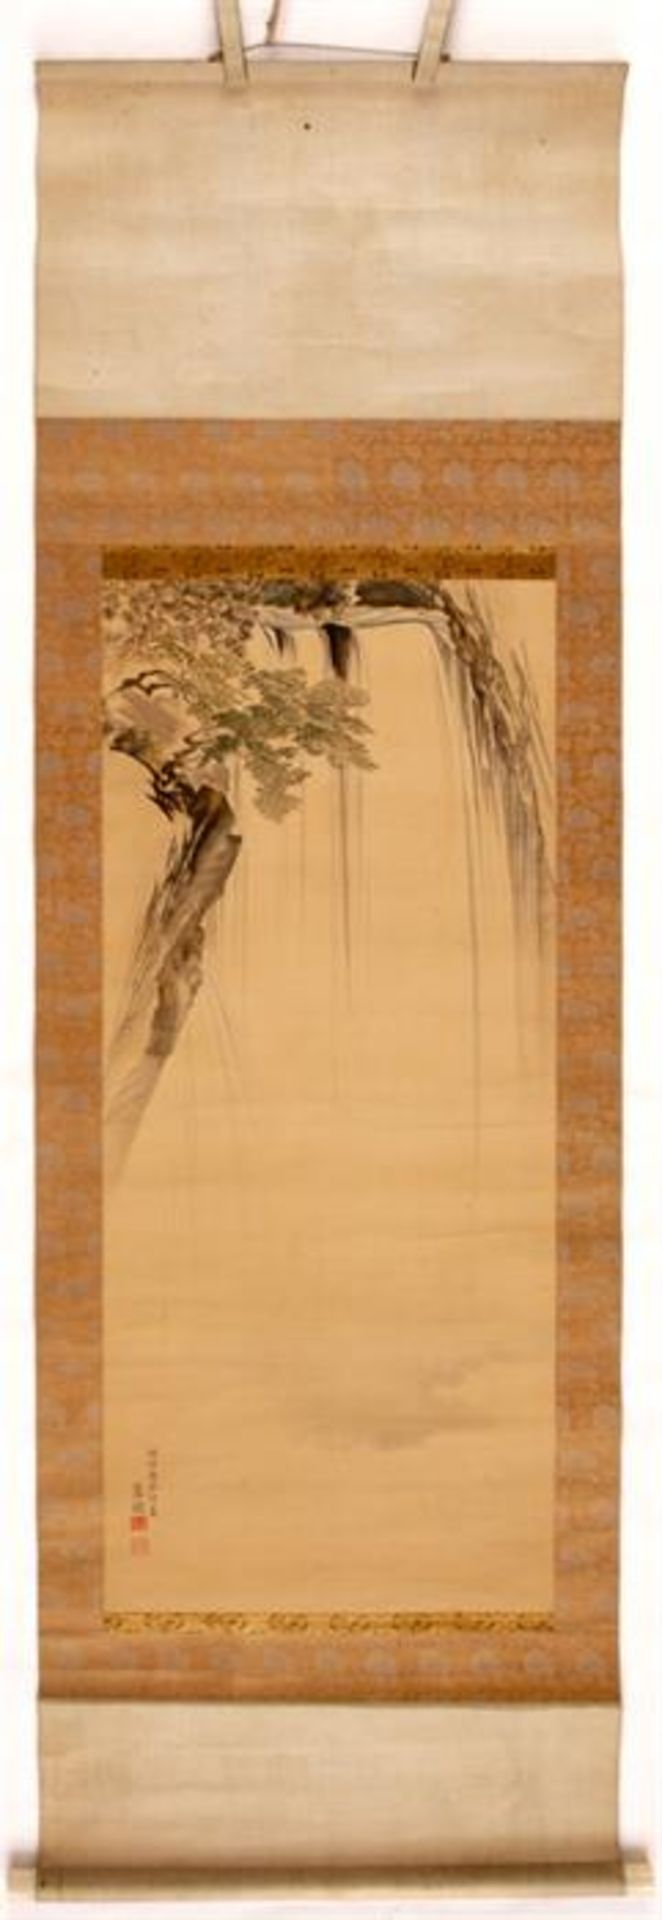 SCROLL PAINTING WITH WATERFALL